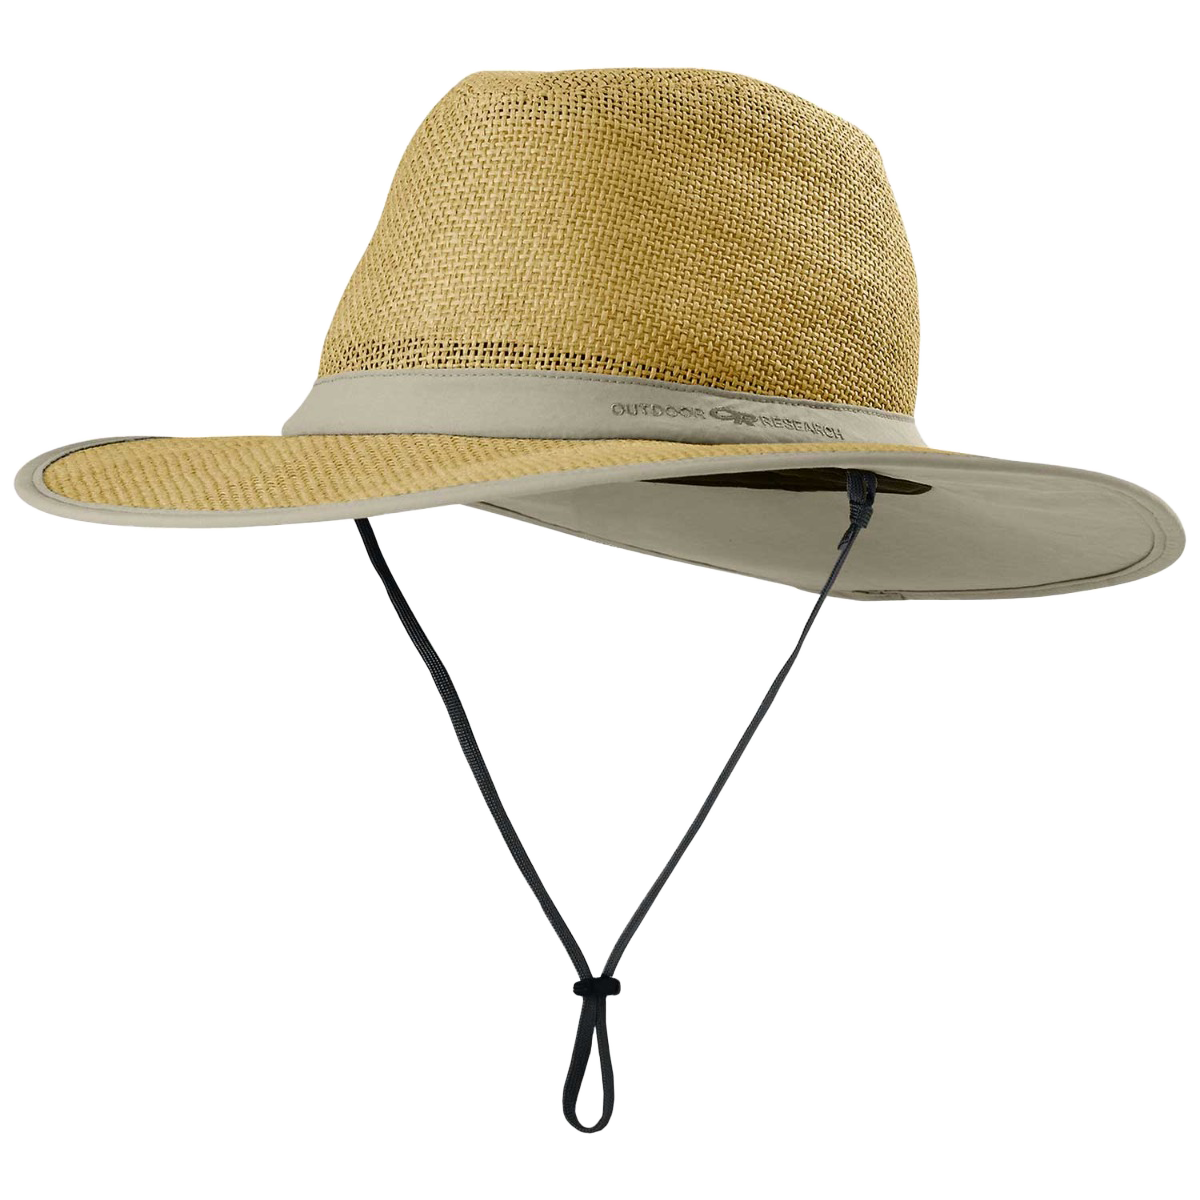 Blank Fishing Bucket Hats for Men and Women Outdoor Sports Free Shipping